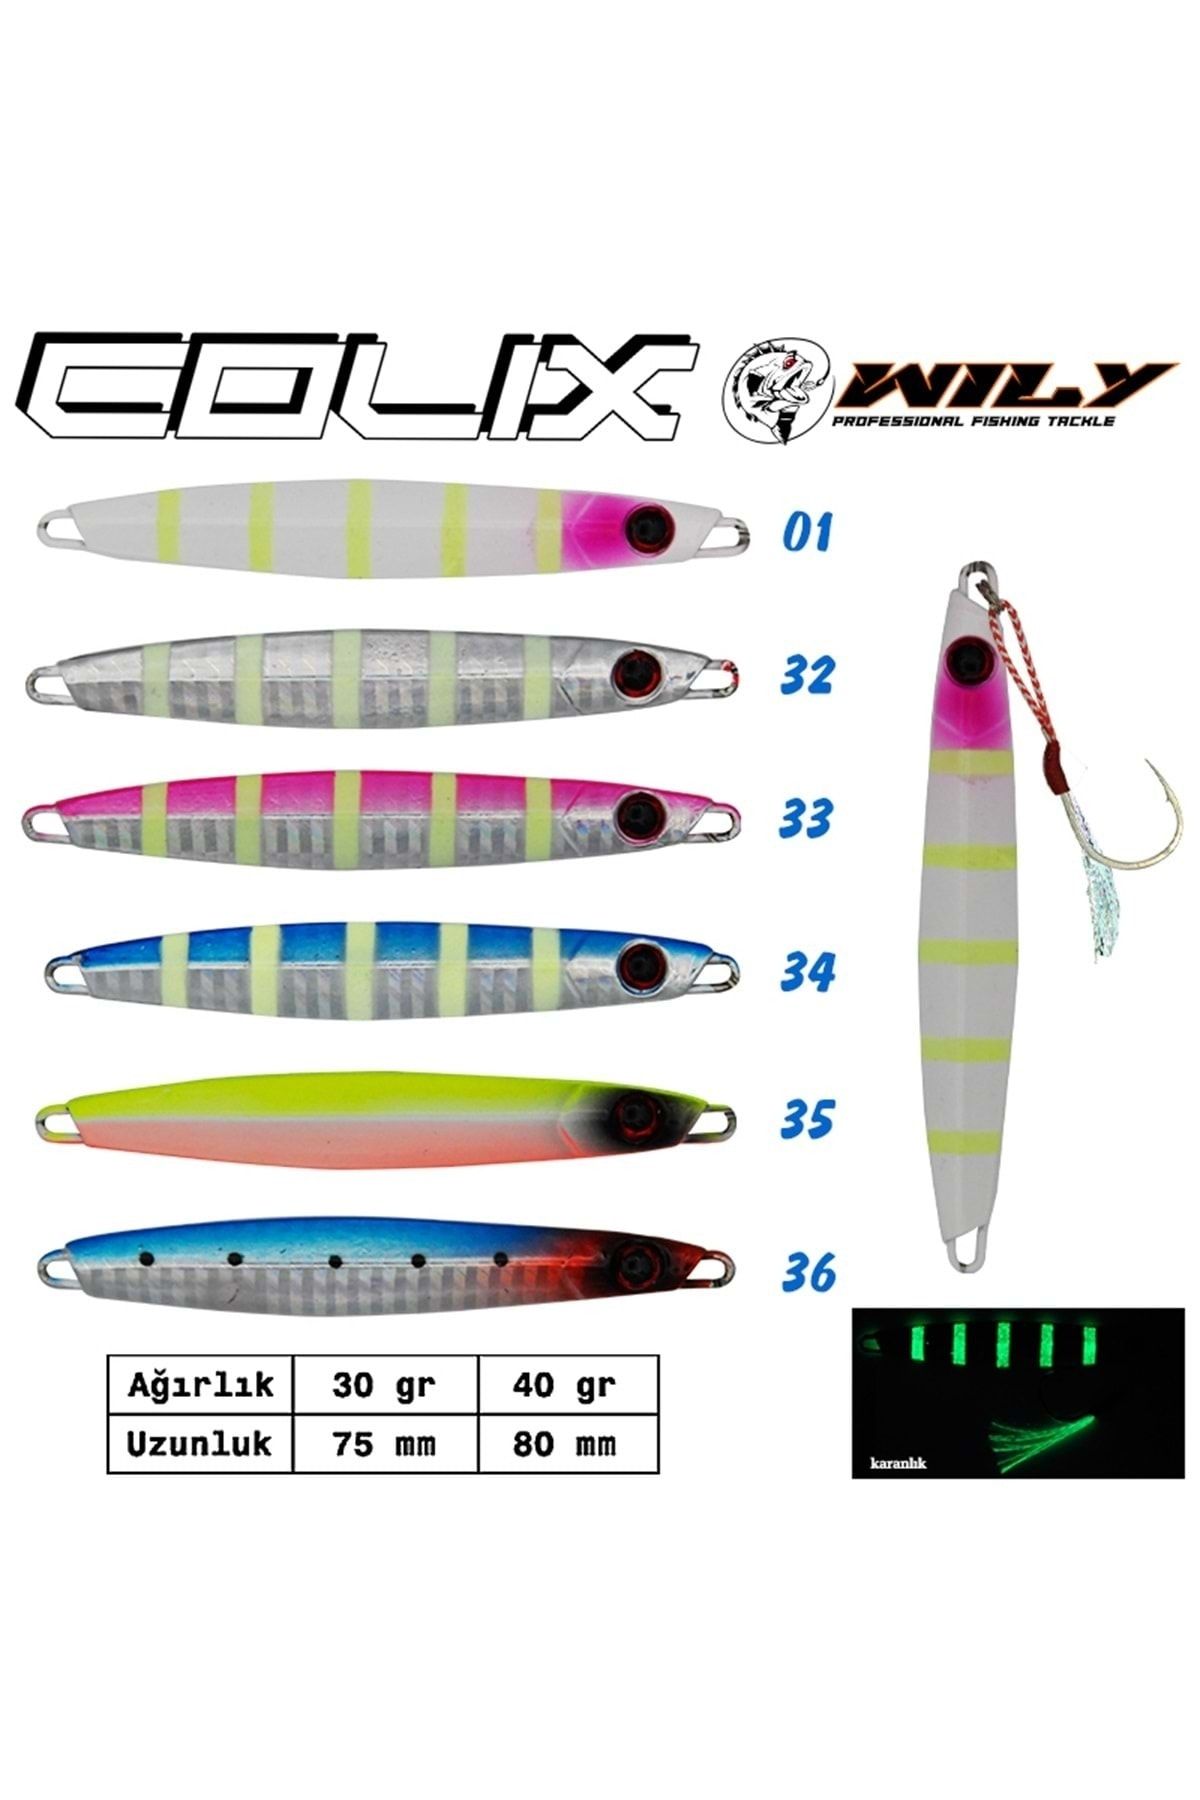 Wily Colix Jig 40 Gr 90 Mm - 01